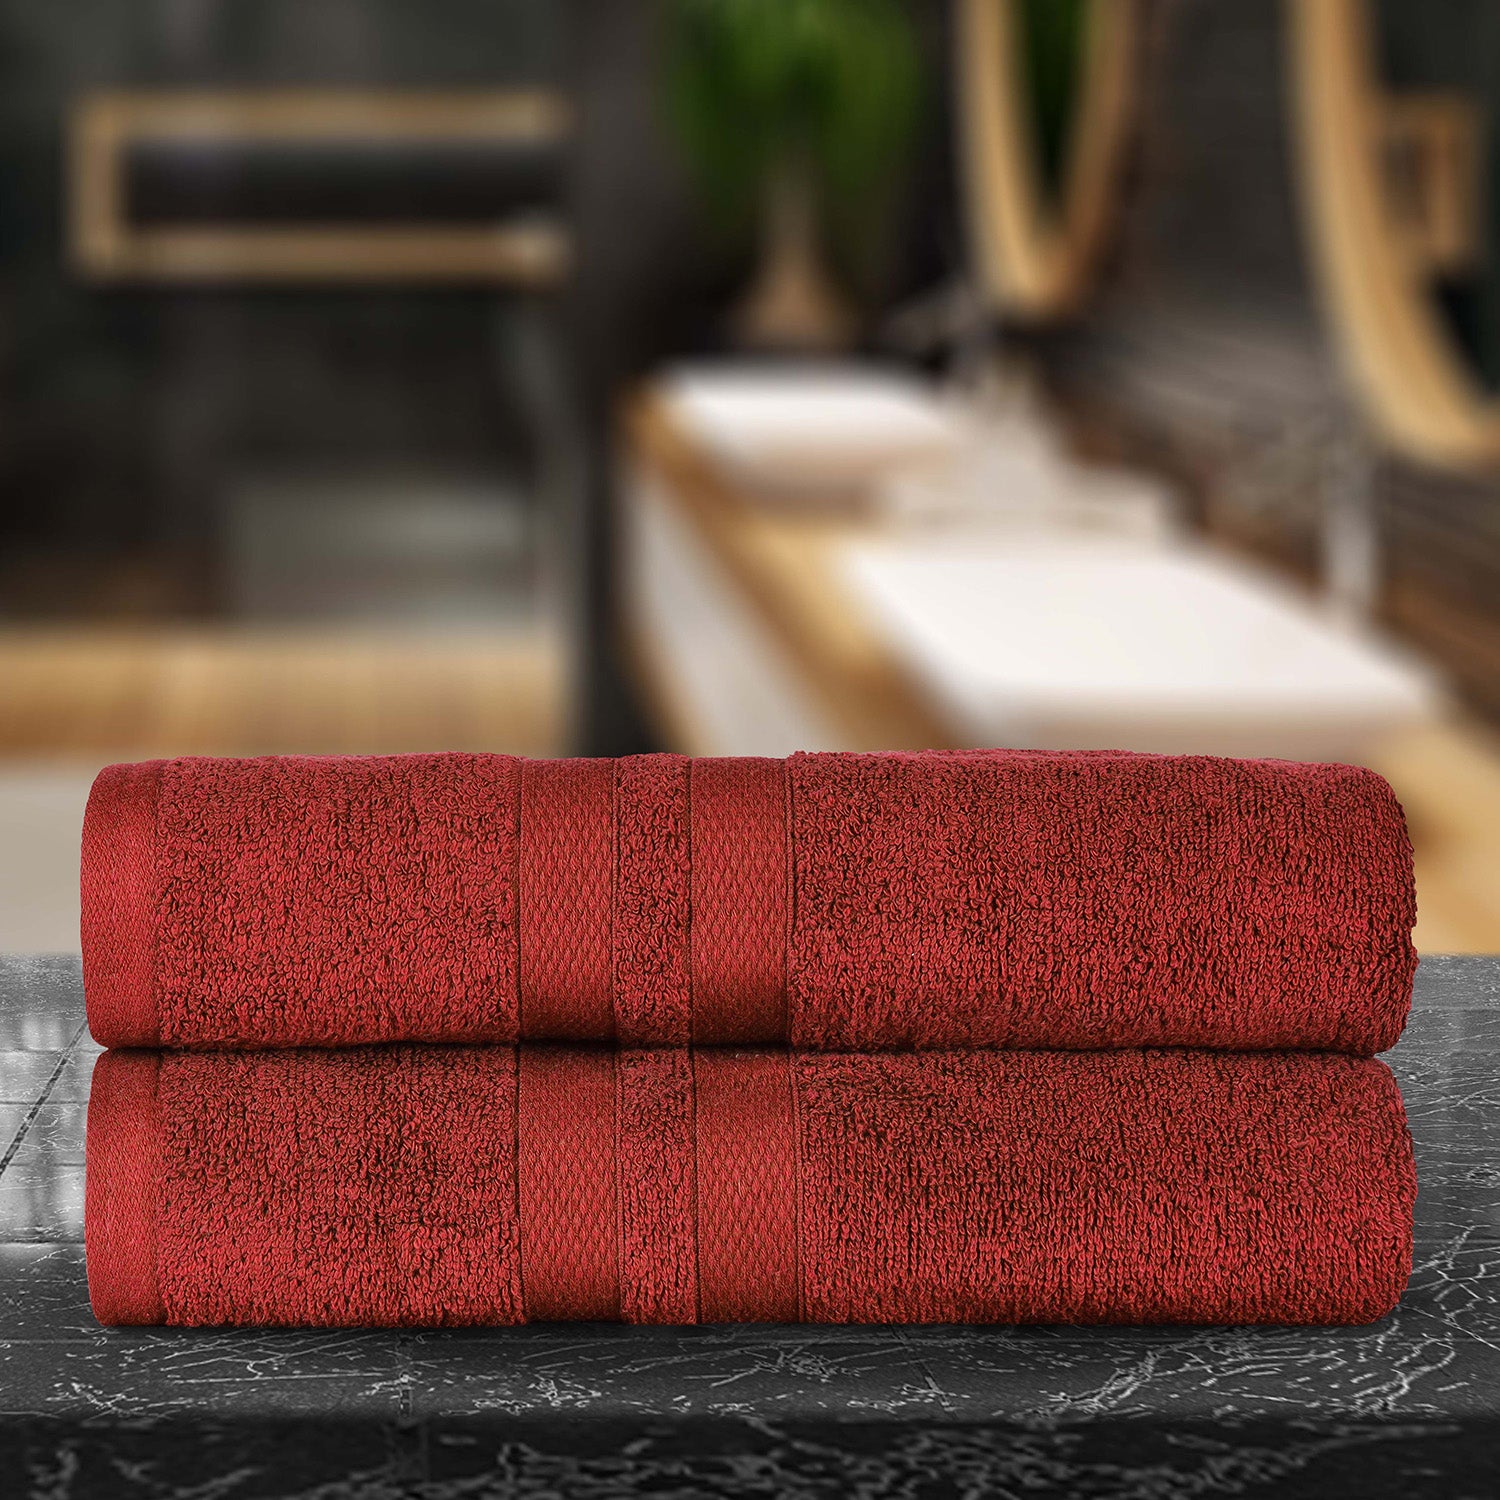 Superior Ultra Soft Cotton Absorbent Solid Bath Sheet (Set of 2) - Maroon